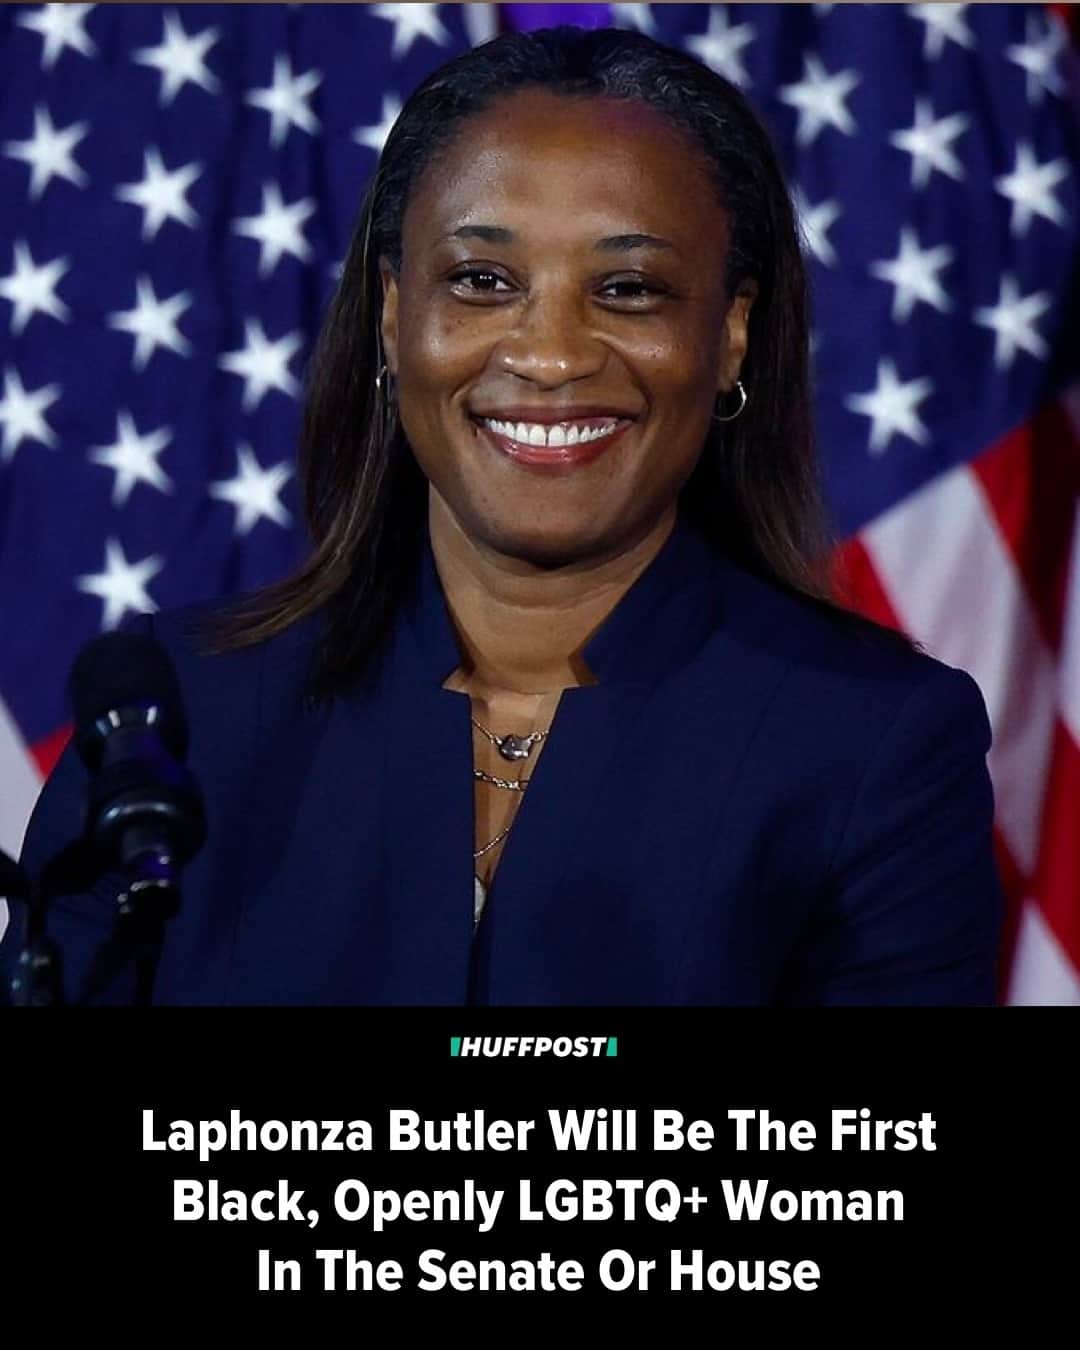 Huffington Postのインスタグラム：「Laphonza Butler, who California Gov. Gavin Newsom (D) appointed Sunday to finish out the late Dianne Feinstein’s Senate term, will make history when she’s sworn in.⁠ ⁠ She will be the first Black, openly LGBTQ+ woman to serve in either chamber of Congress.⁠ ⁠ “Today she shatters a rainbow ceiling in becoming the first out Black LGBTQ+ U.S. senator and she will serve knowing her presence and impact will be felt in countless ways,” Annise Parker, the president and CEO of LGBTQ+ Victory Institute, said in a statement Monday.⁠ ⁠ Read more at our link in bio. // 📷 Getty Images // 🖊 Jennifer Bendery」